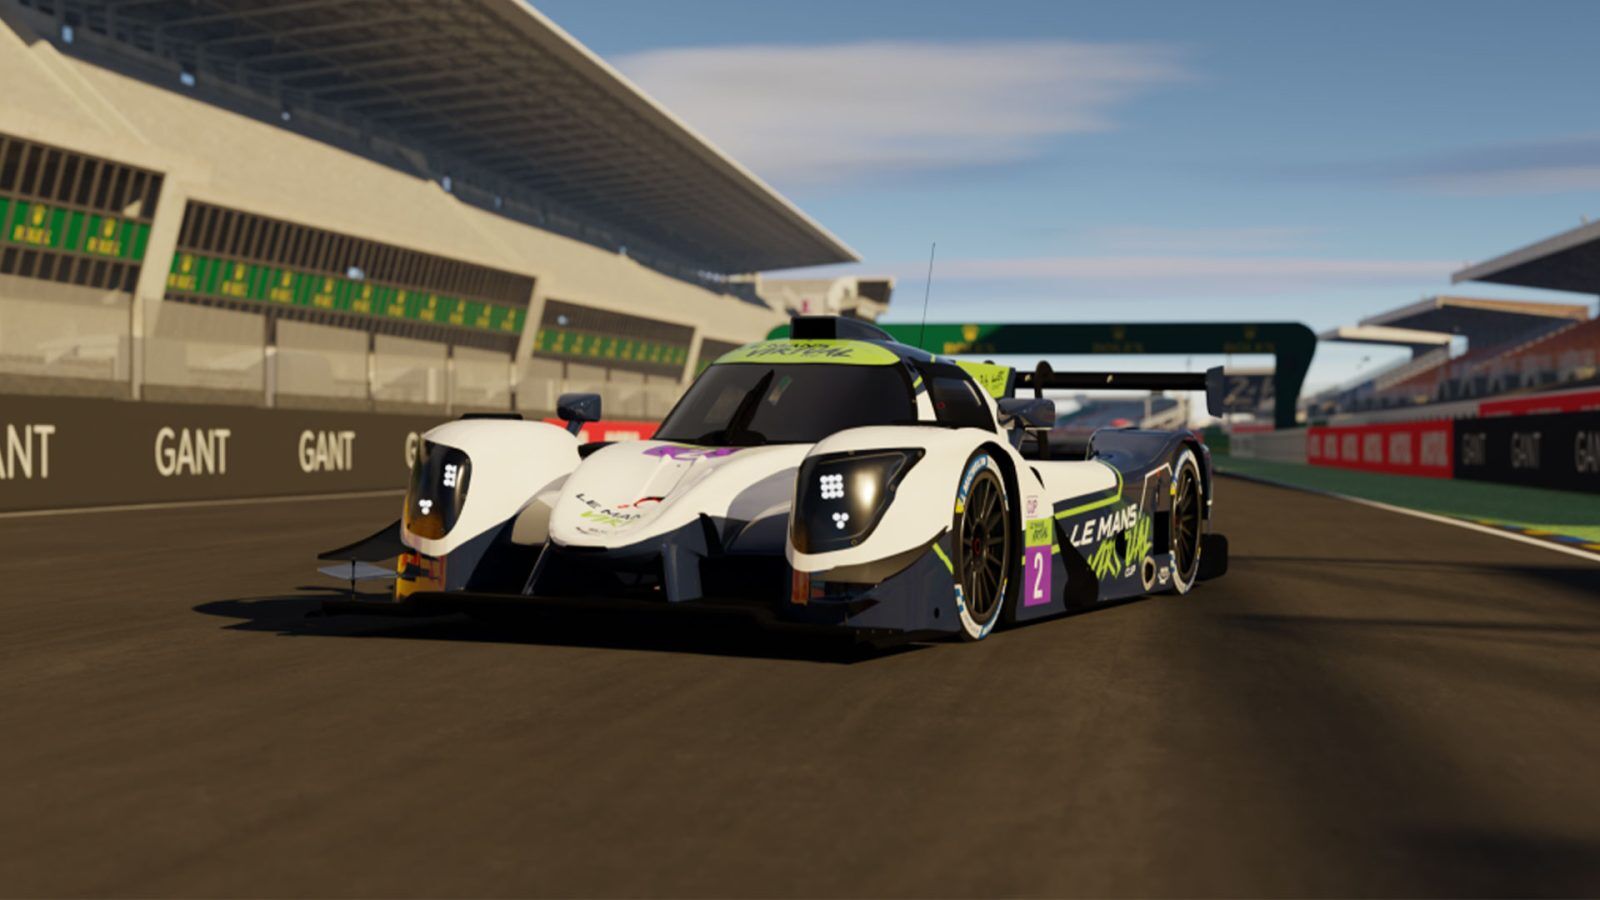 LMP2 car with 24h Le Mans Virtual livery on the pit lane straight at circuit de la sarthe in rfactor2